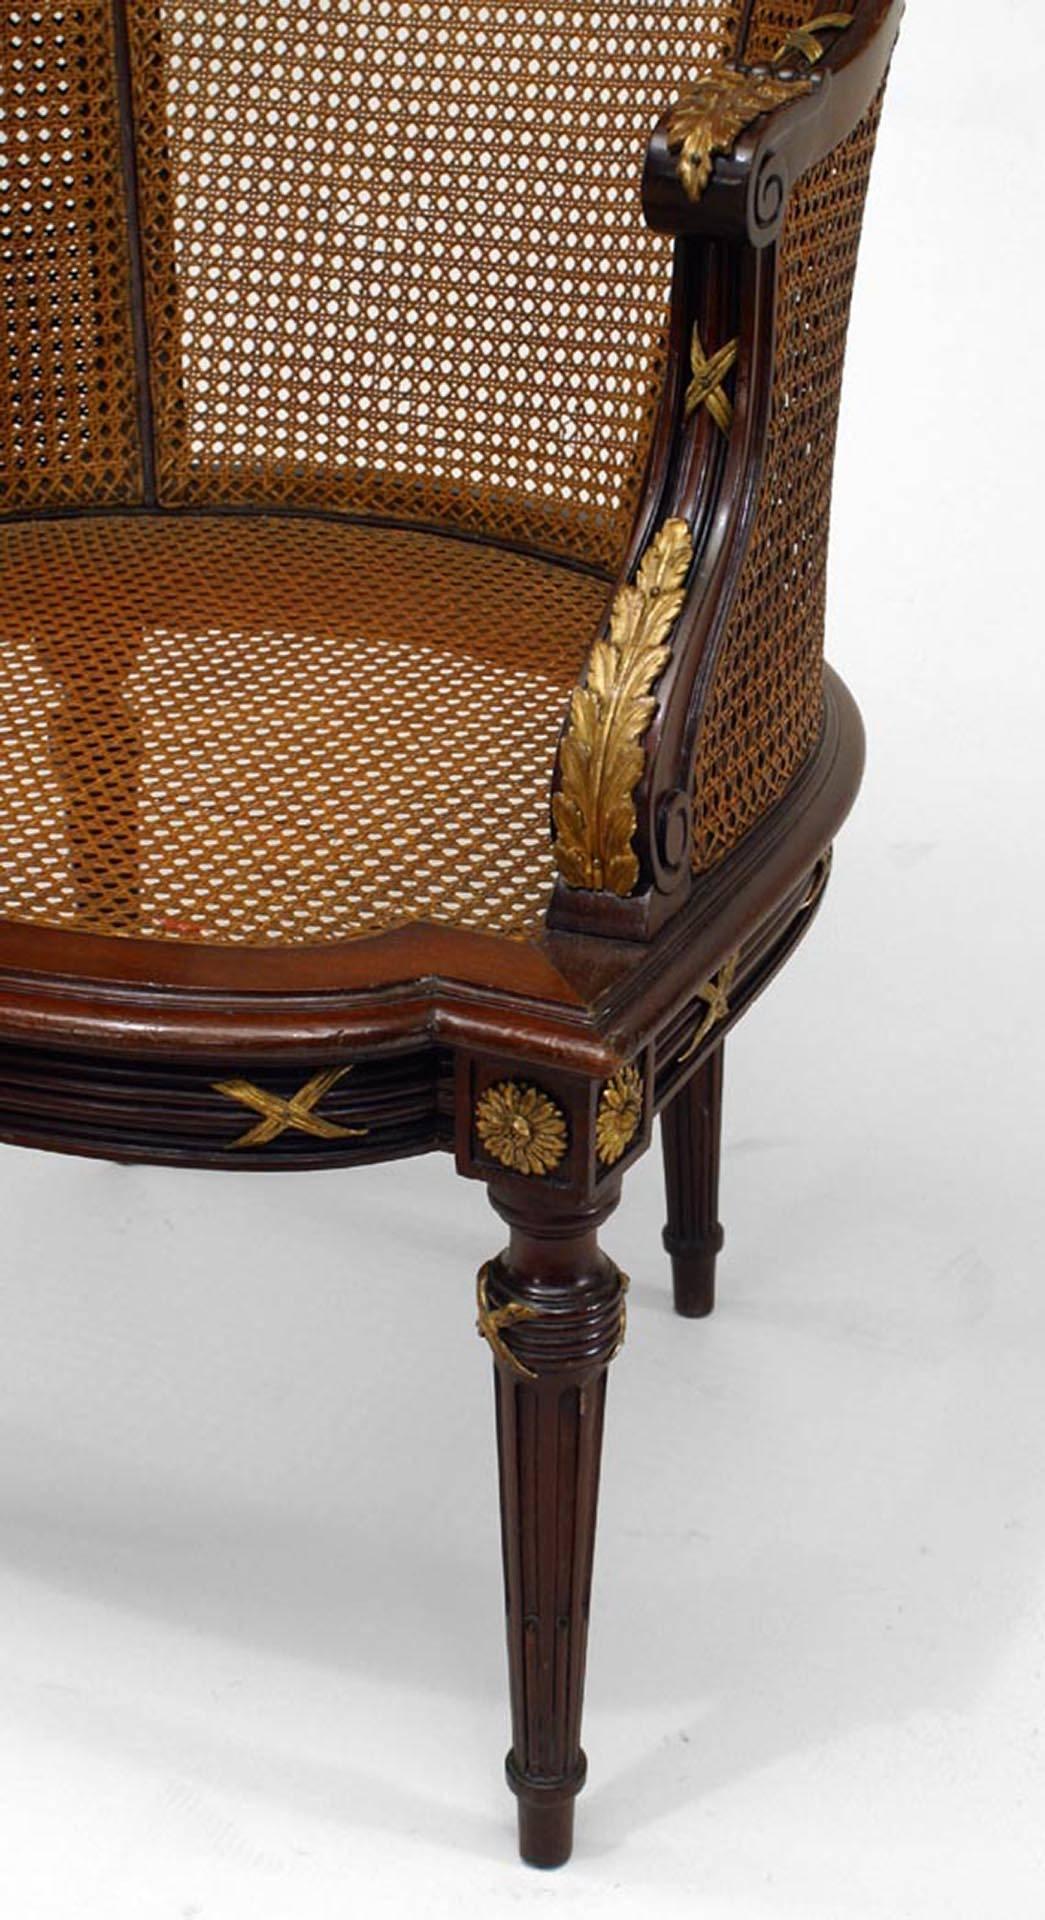 19th Century French Louis XVI Style Ormolu-Mounted Mahogany Caned Bergere For Sale